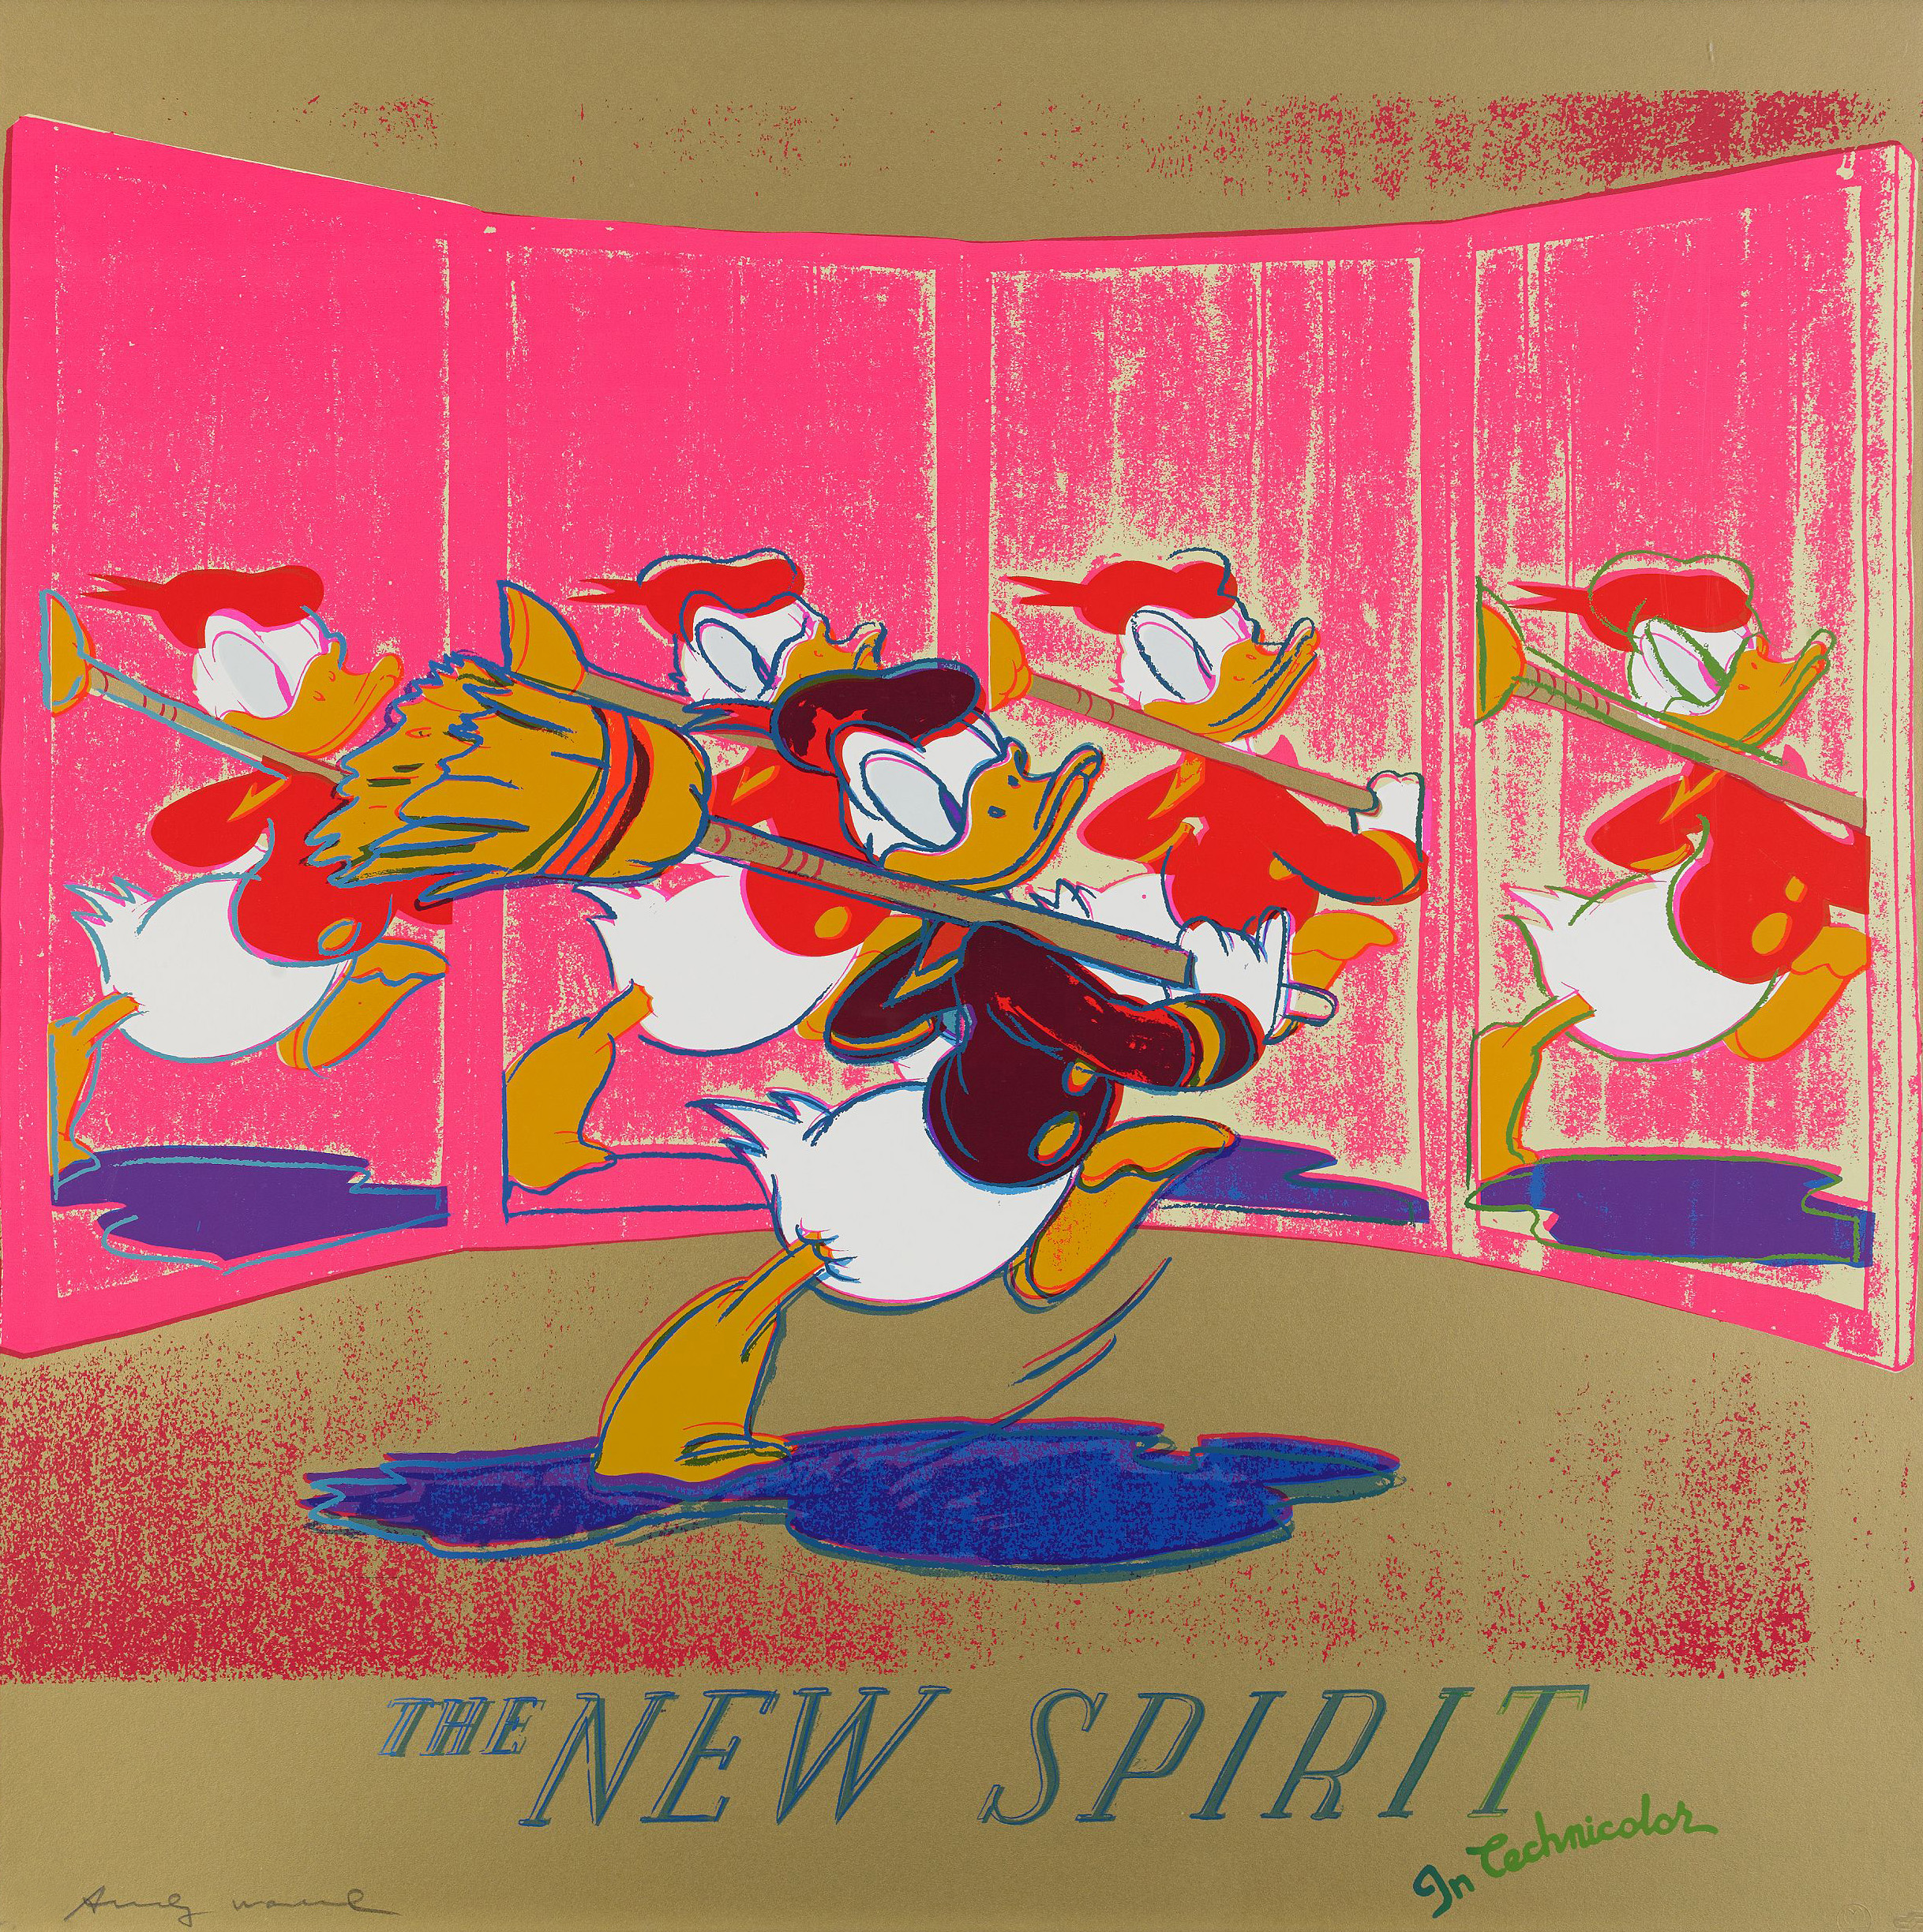 Andy Warhol, The New Spirit (Donald Duck) (from Ads)